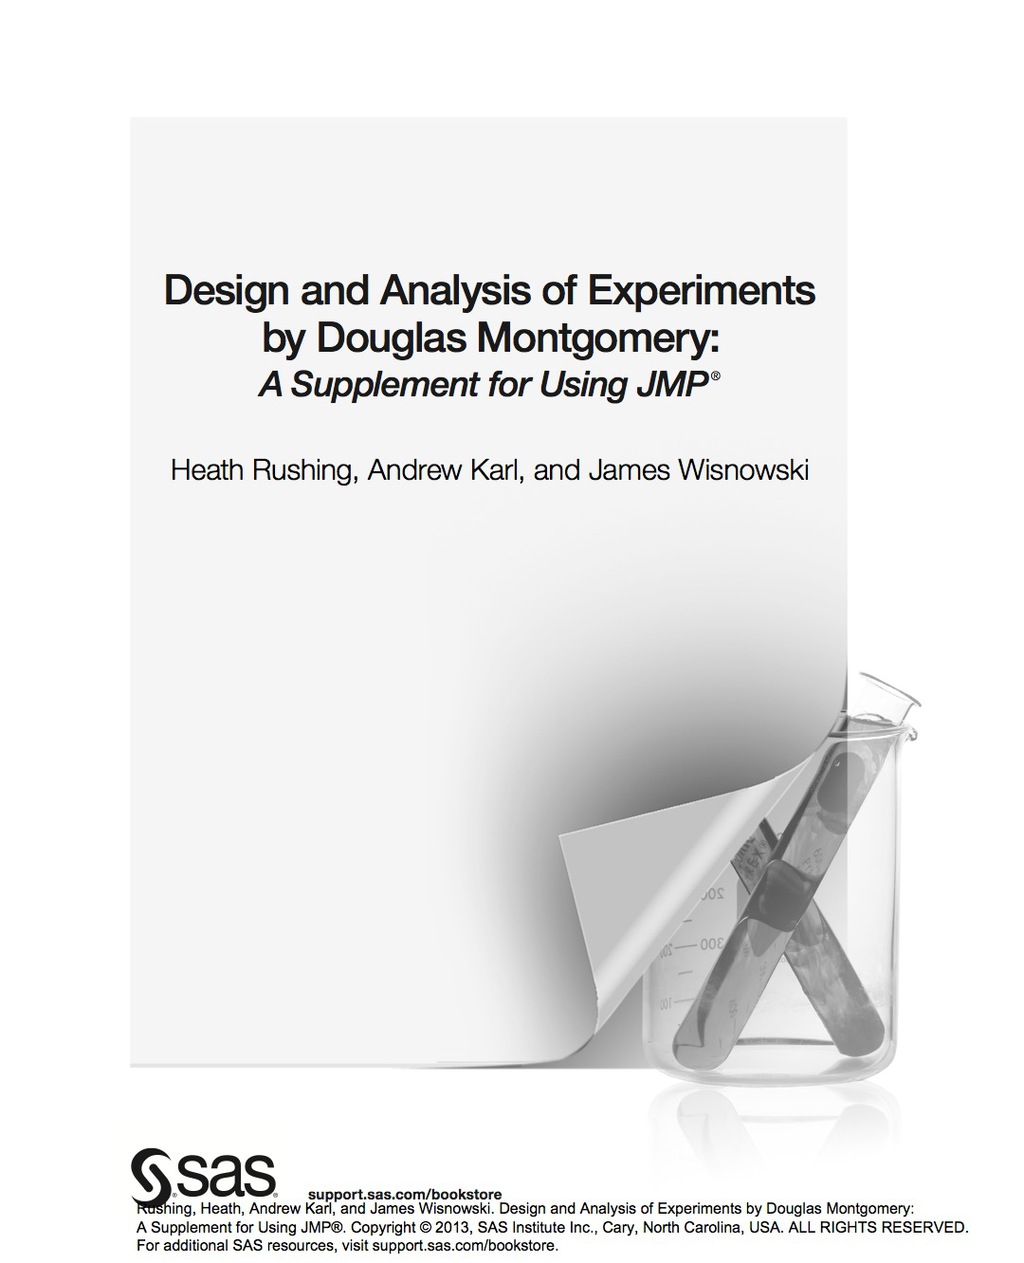 Design and Analysis of Experiments by Douglas Montgomery: A Supplement for Using JMP (eBook) - Heath Rushing; Andrew Karl; James Wisnowski